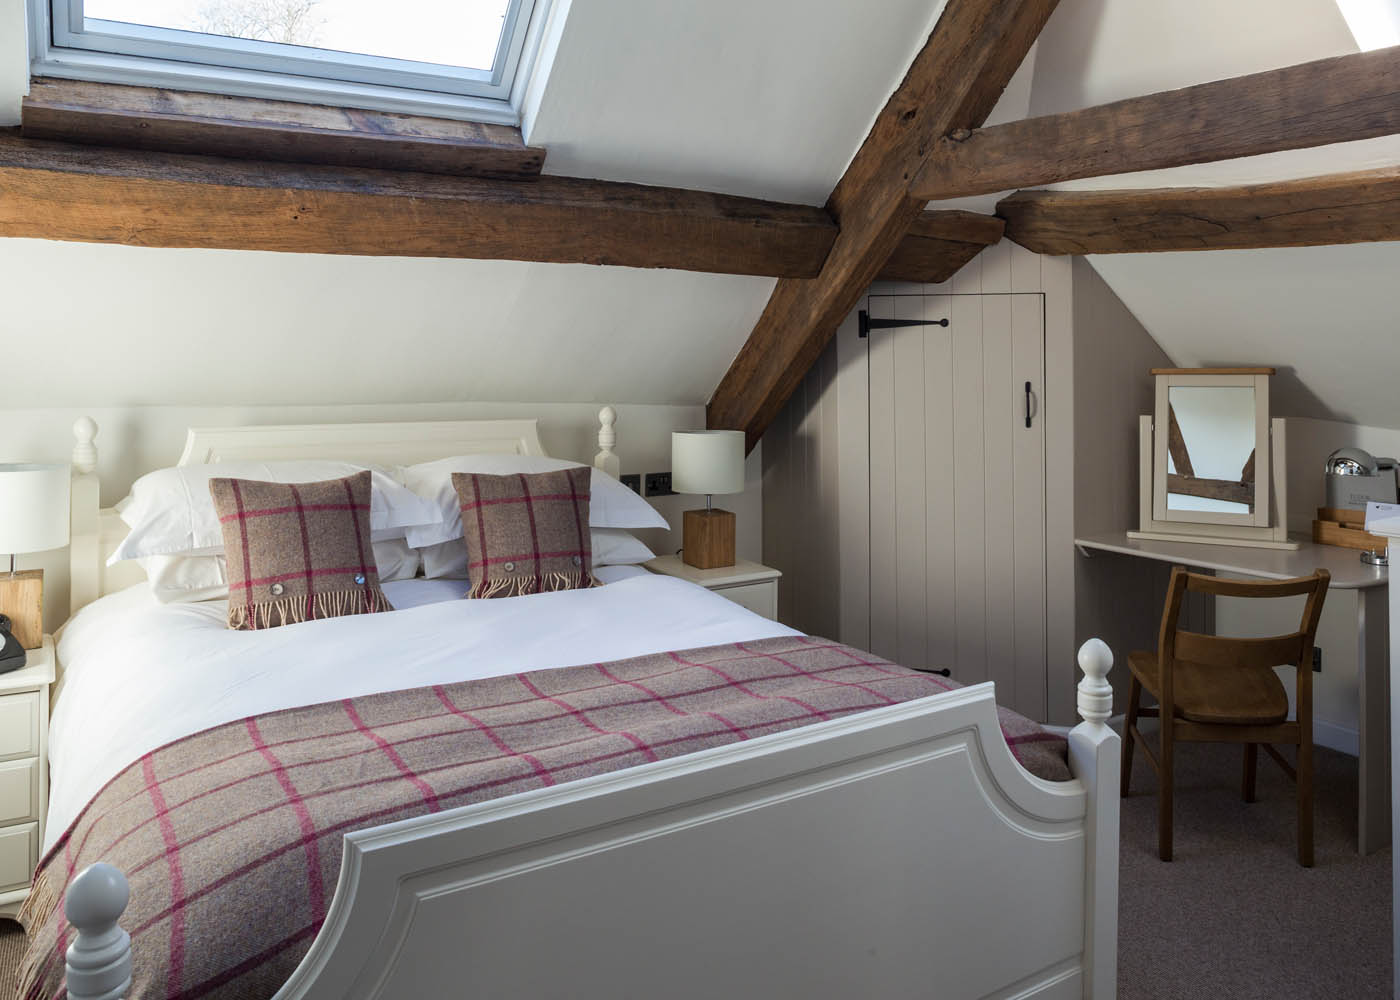 Bedroom, accommodation at Tudor Farmhouse Hotel, Forest of Dean, Clearwell